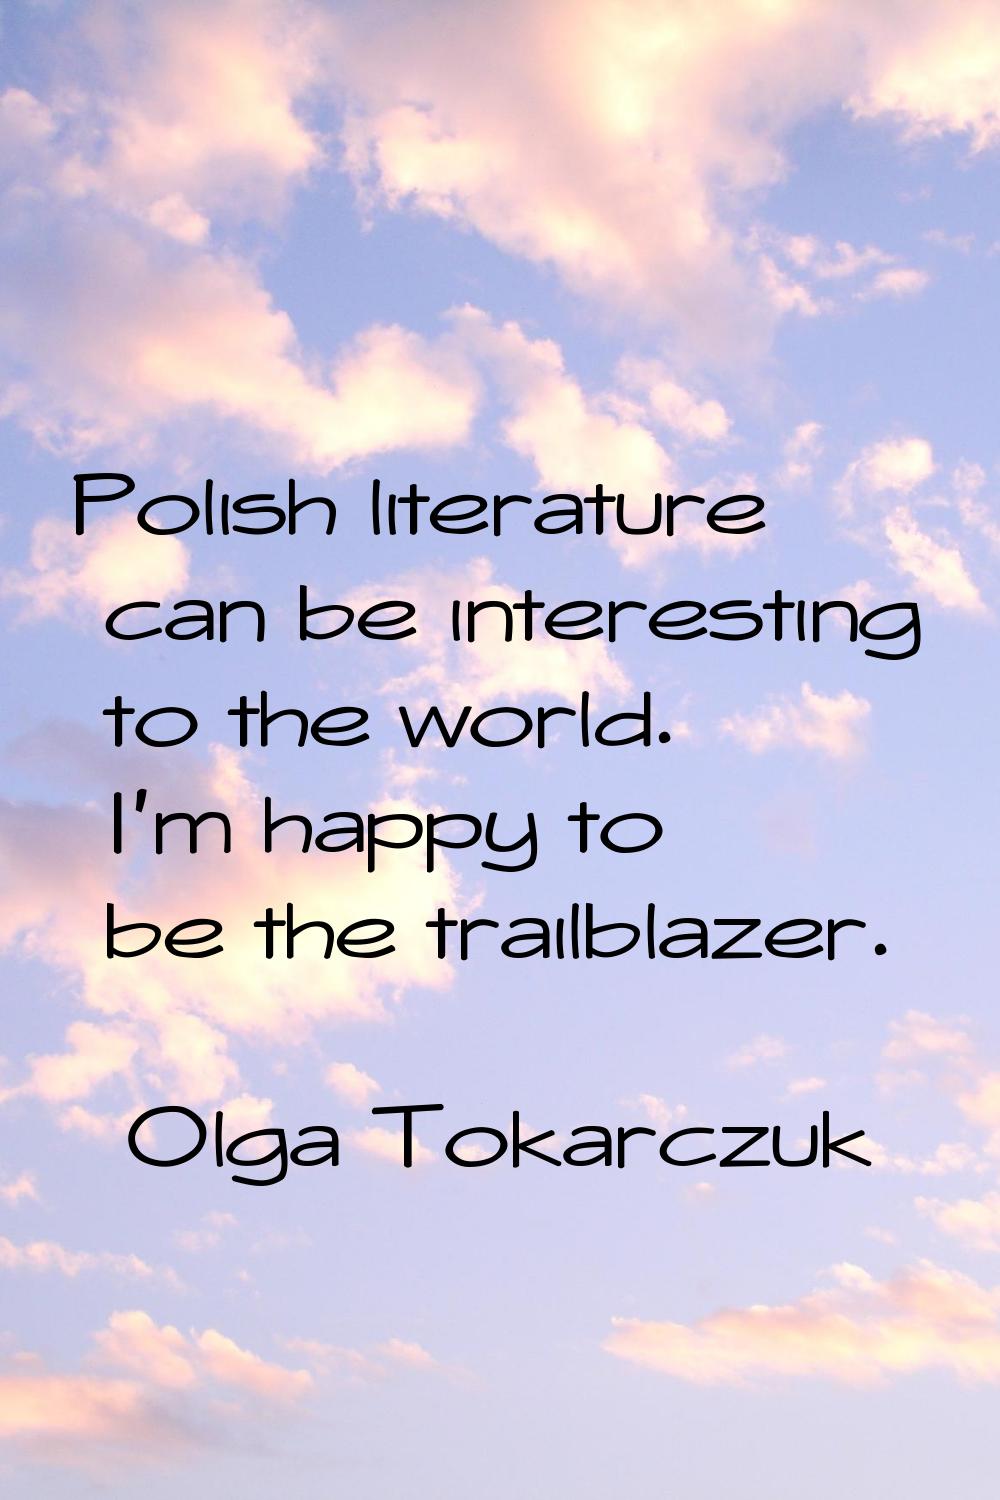 Polish literature can be interesting to the world. I'm happy to be the trailblazer.